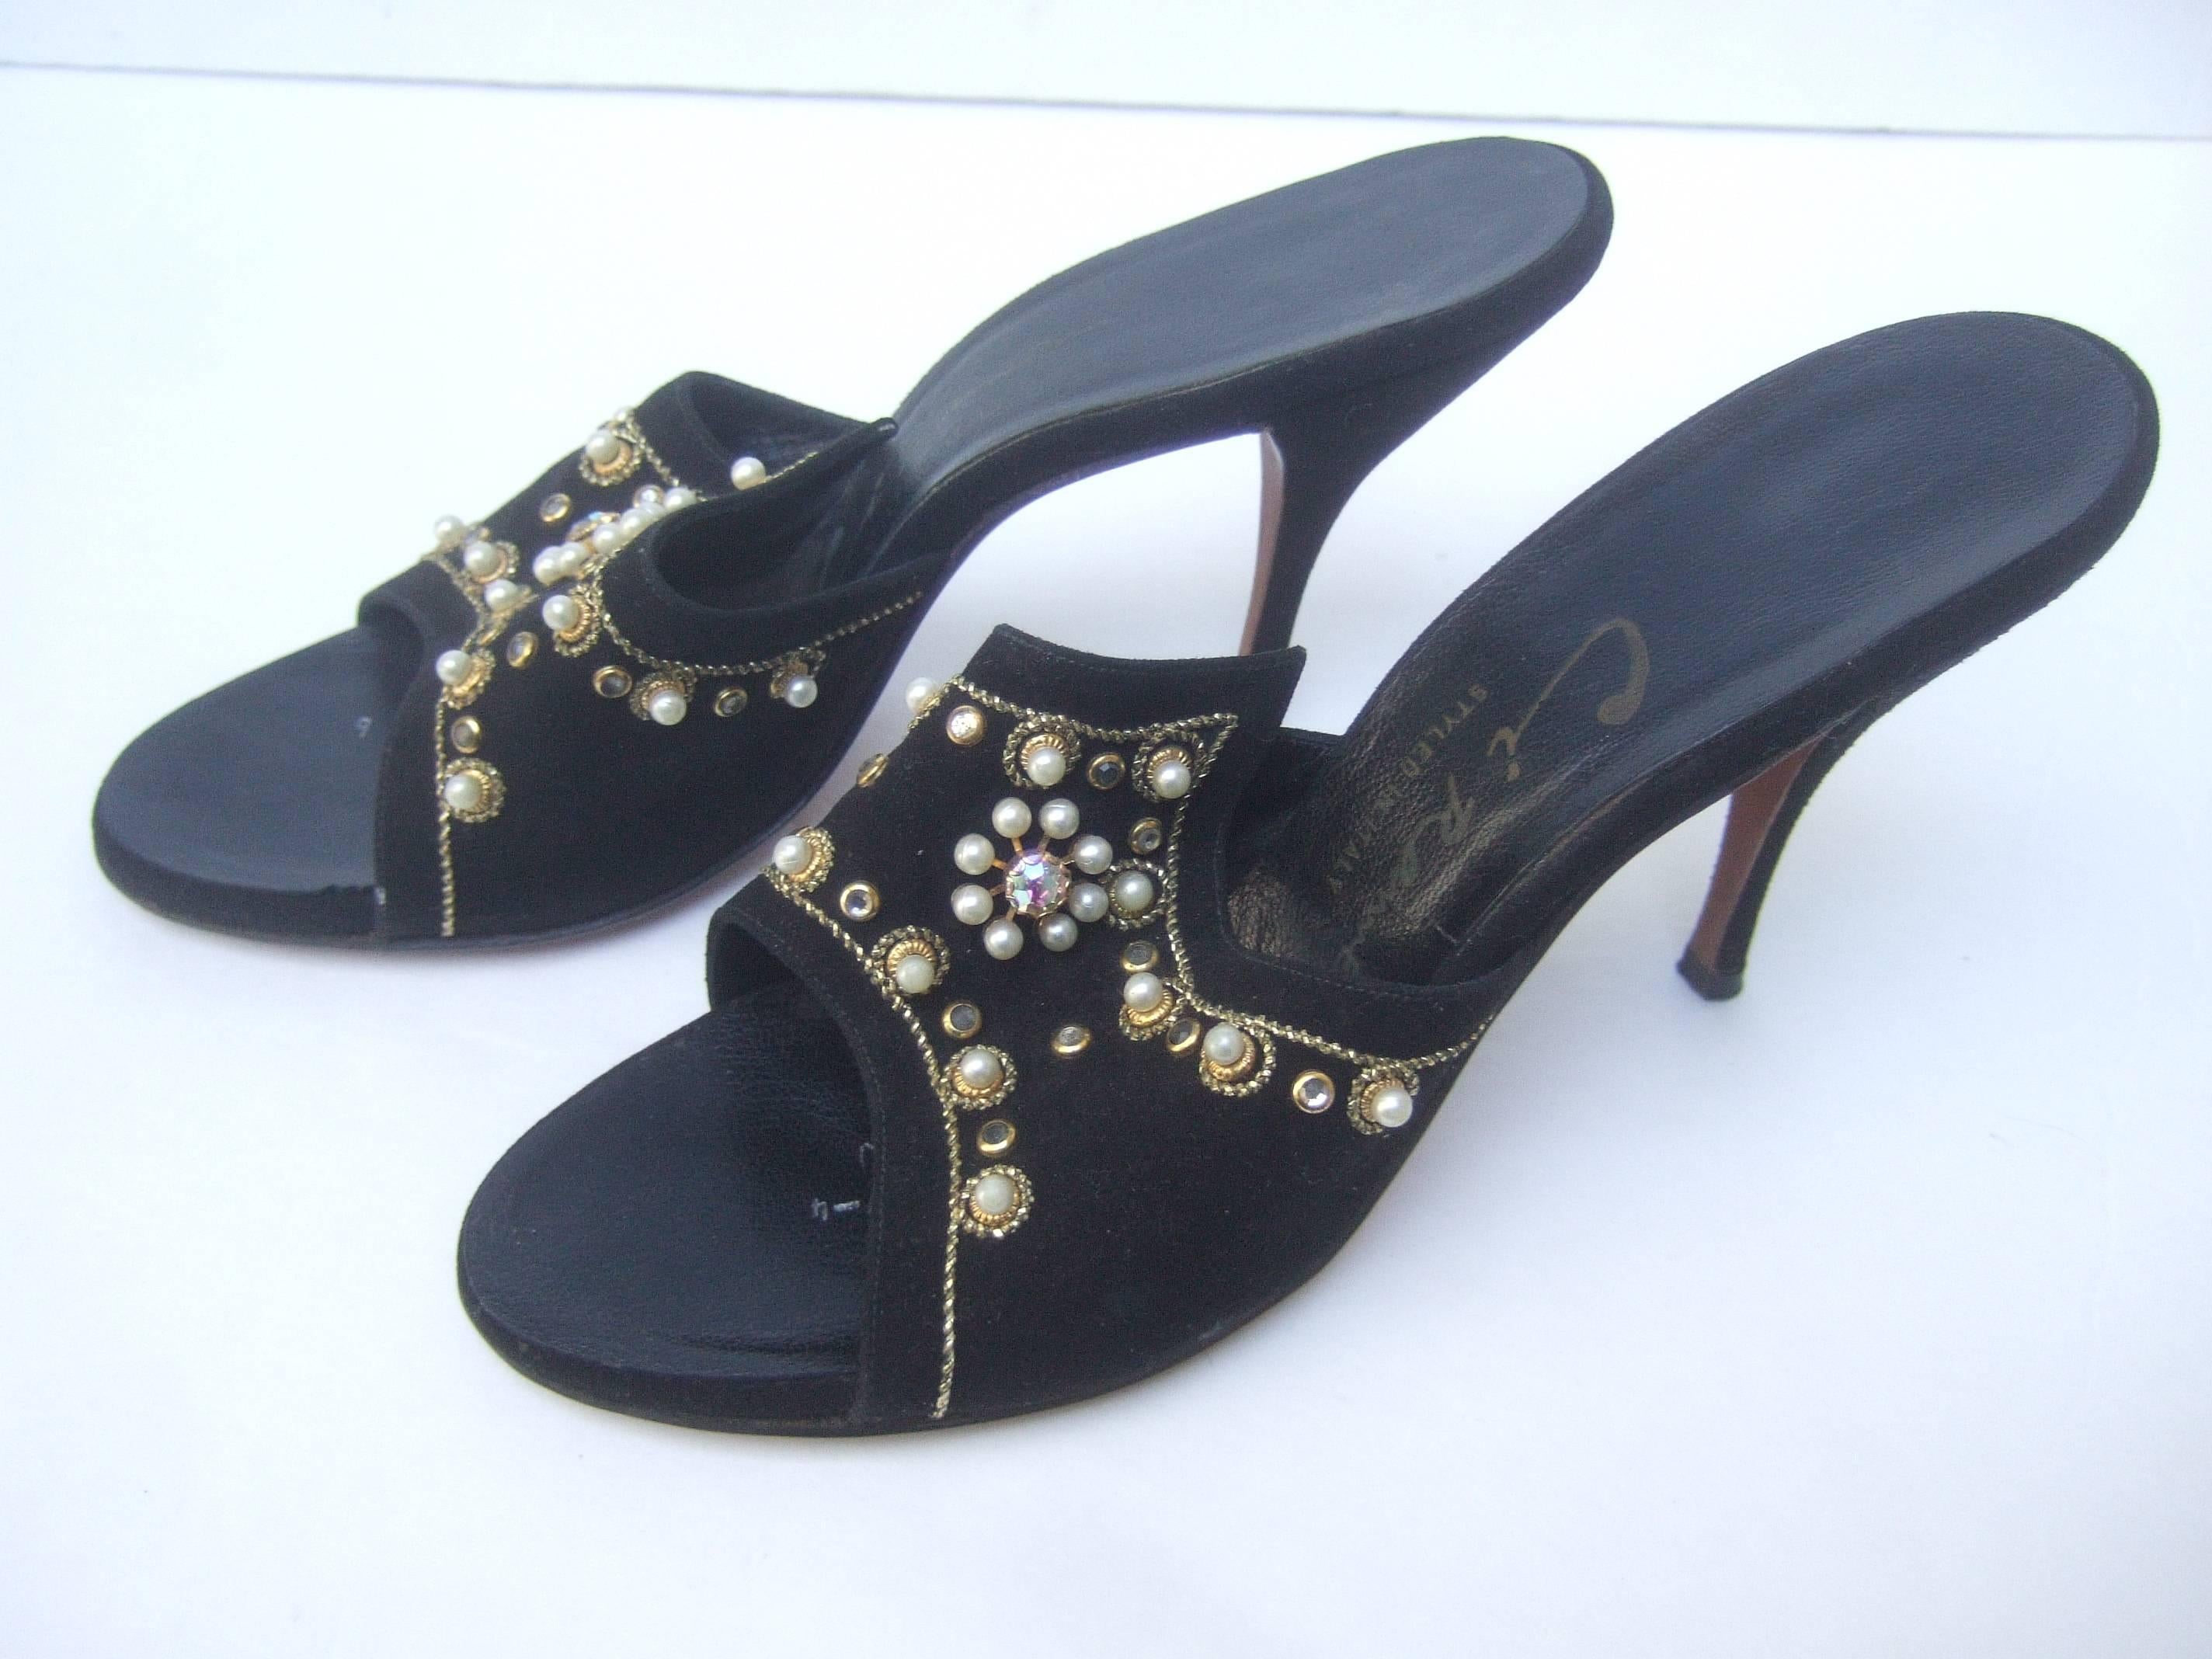 Jeweled vintage black suede mules Made in Italy
The chic retro pumps are embellished with
glittering crystals and clusters of resin enamel
pearls

The open toe heels are accented with gold 
metallic trim. The elegant retro shoes make
a very